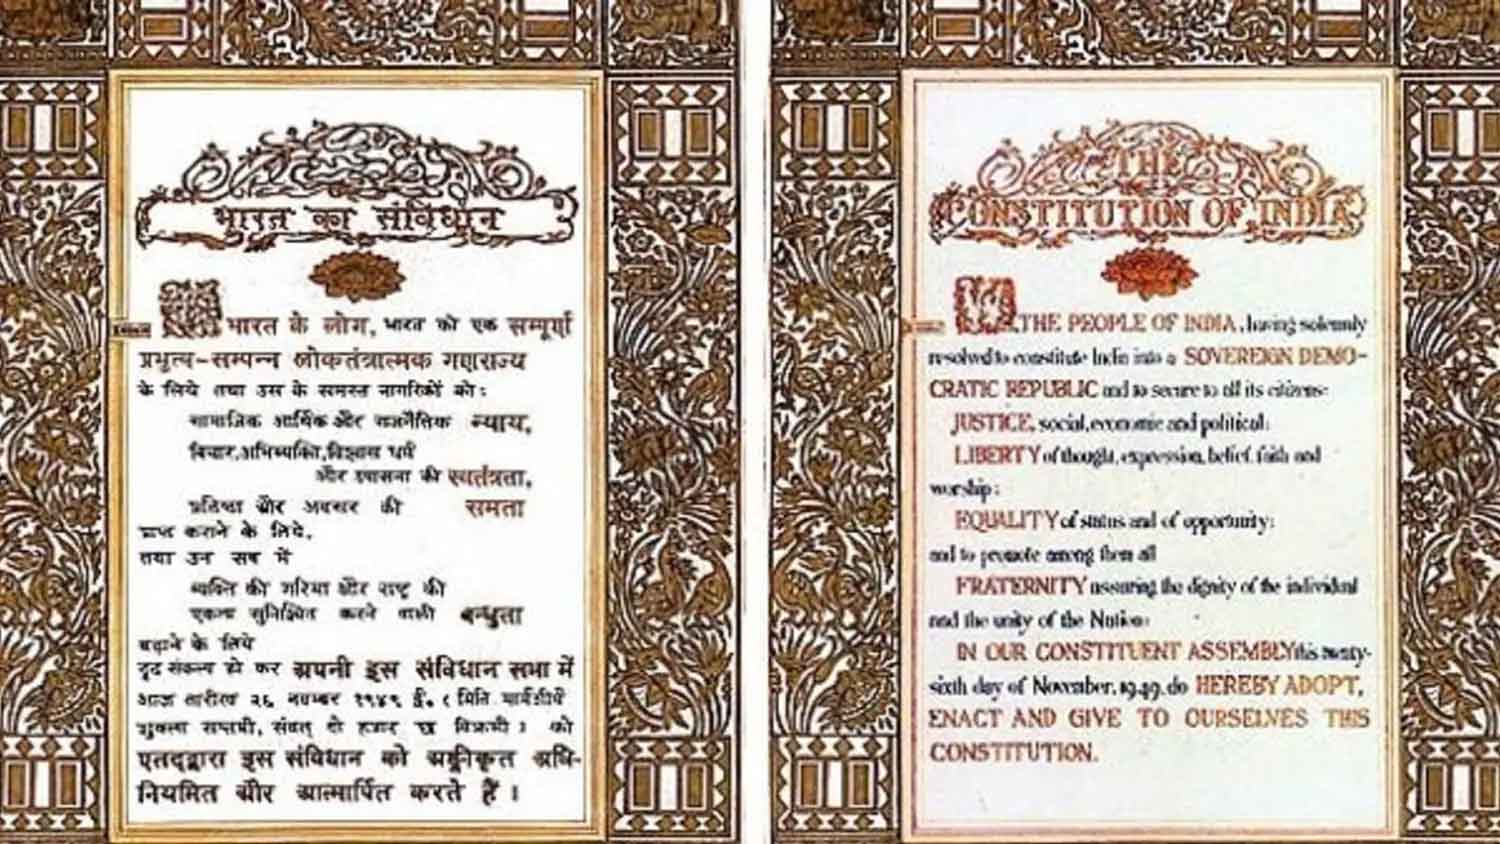 preamble page of the constitution of India in Hindi and English languages.